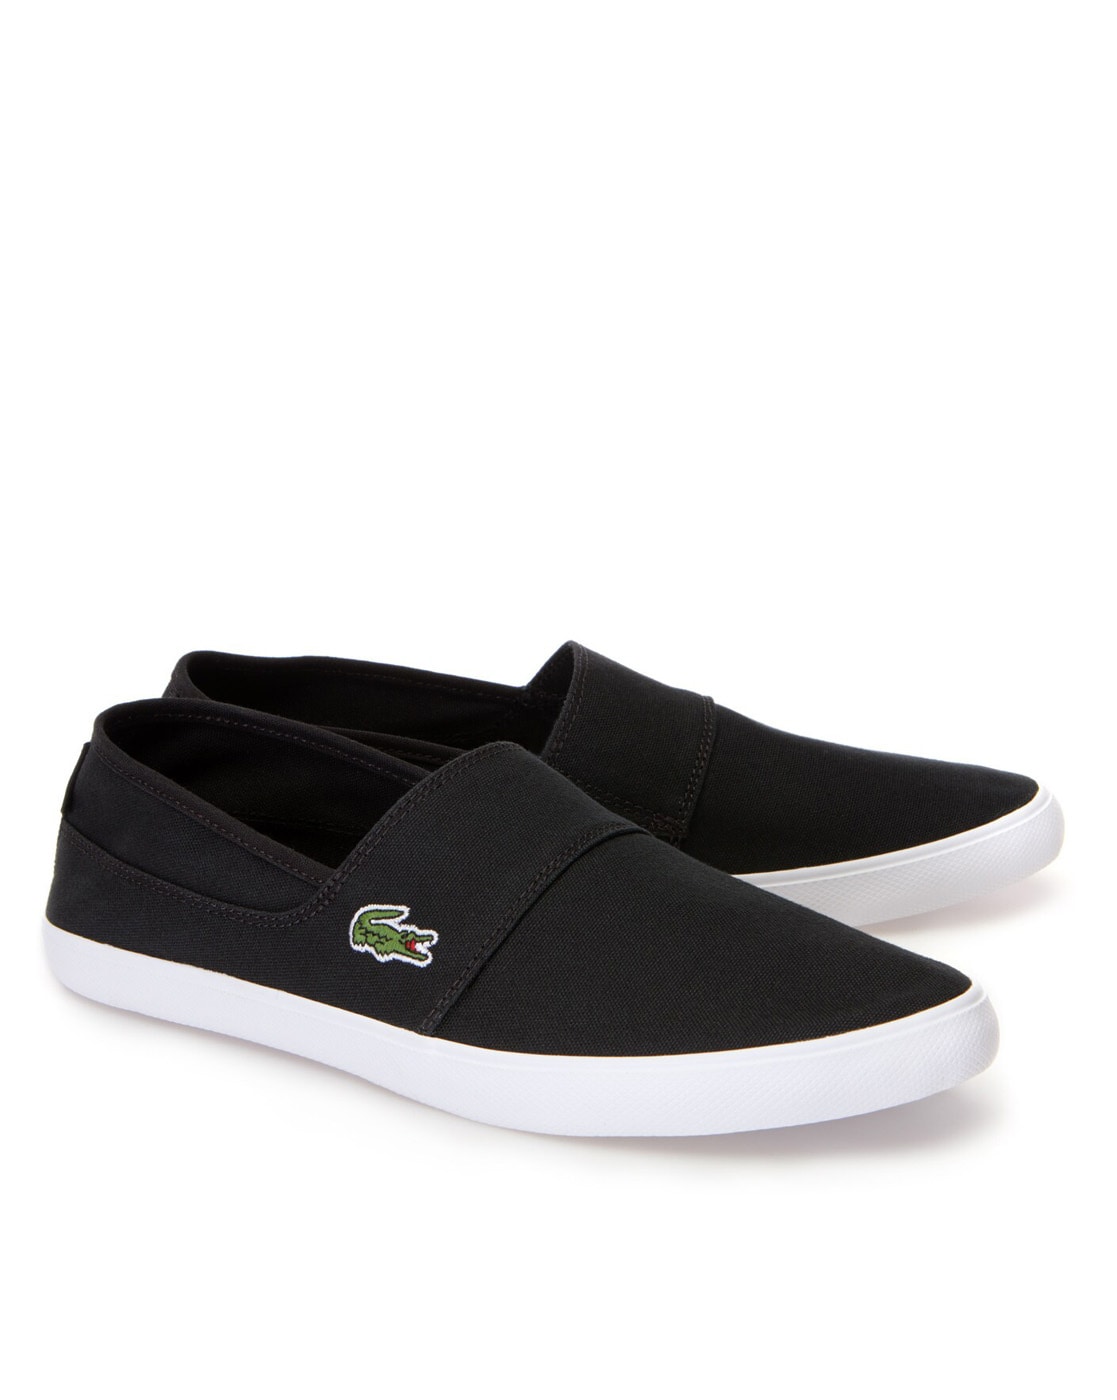 Discover 159+ expensive lacoste shoes latest